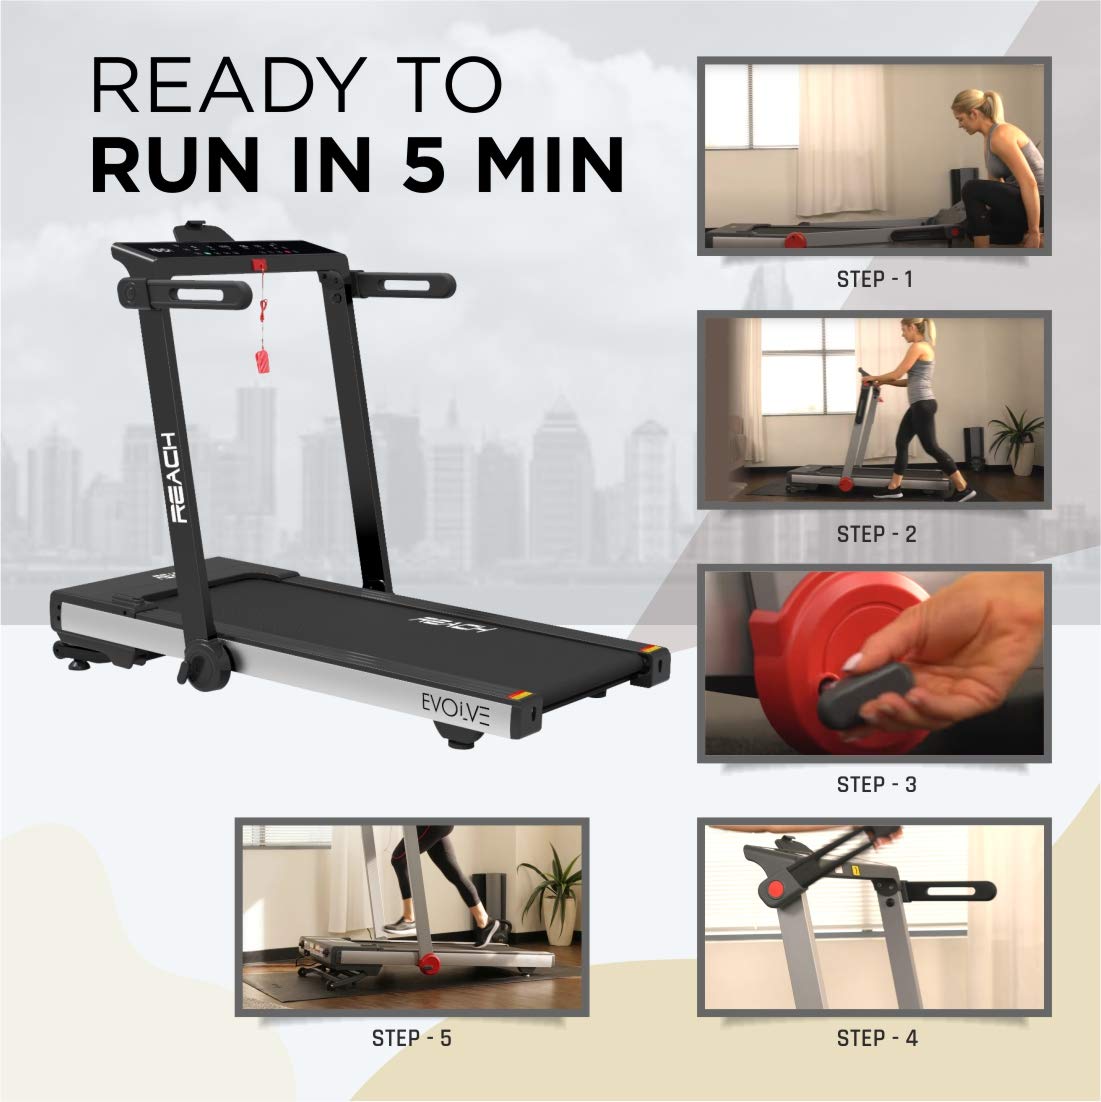 Reach Evolve 6 HP Peak | For Running Walking & Jogging with Auto Incline | 90 Degree Foldable Treadmill for Home Gym | Fitness Machine with LCD Display & Bluetooth | 15 Preset Workouts for Cardio | 16 km/hr Max User Weight 110 kgs